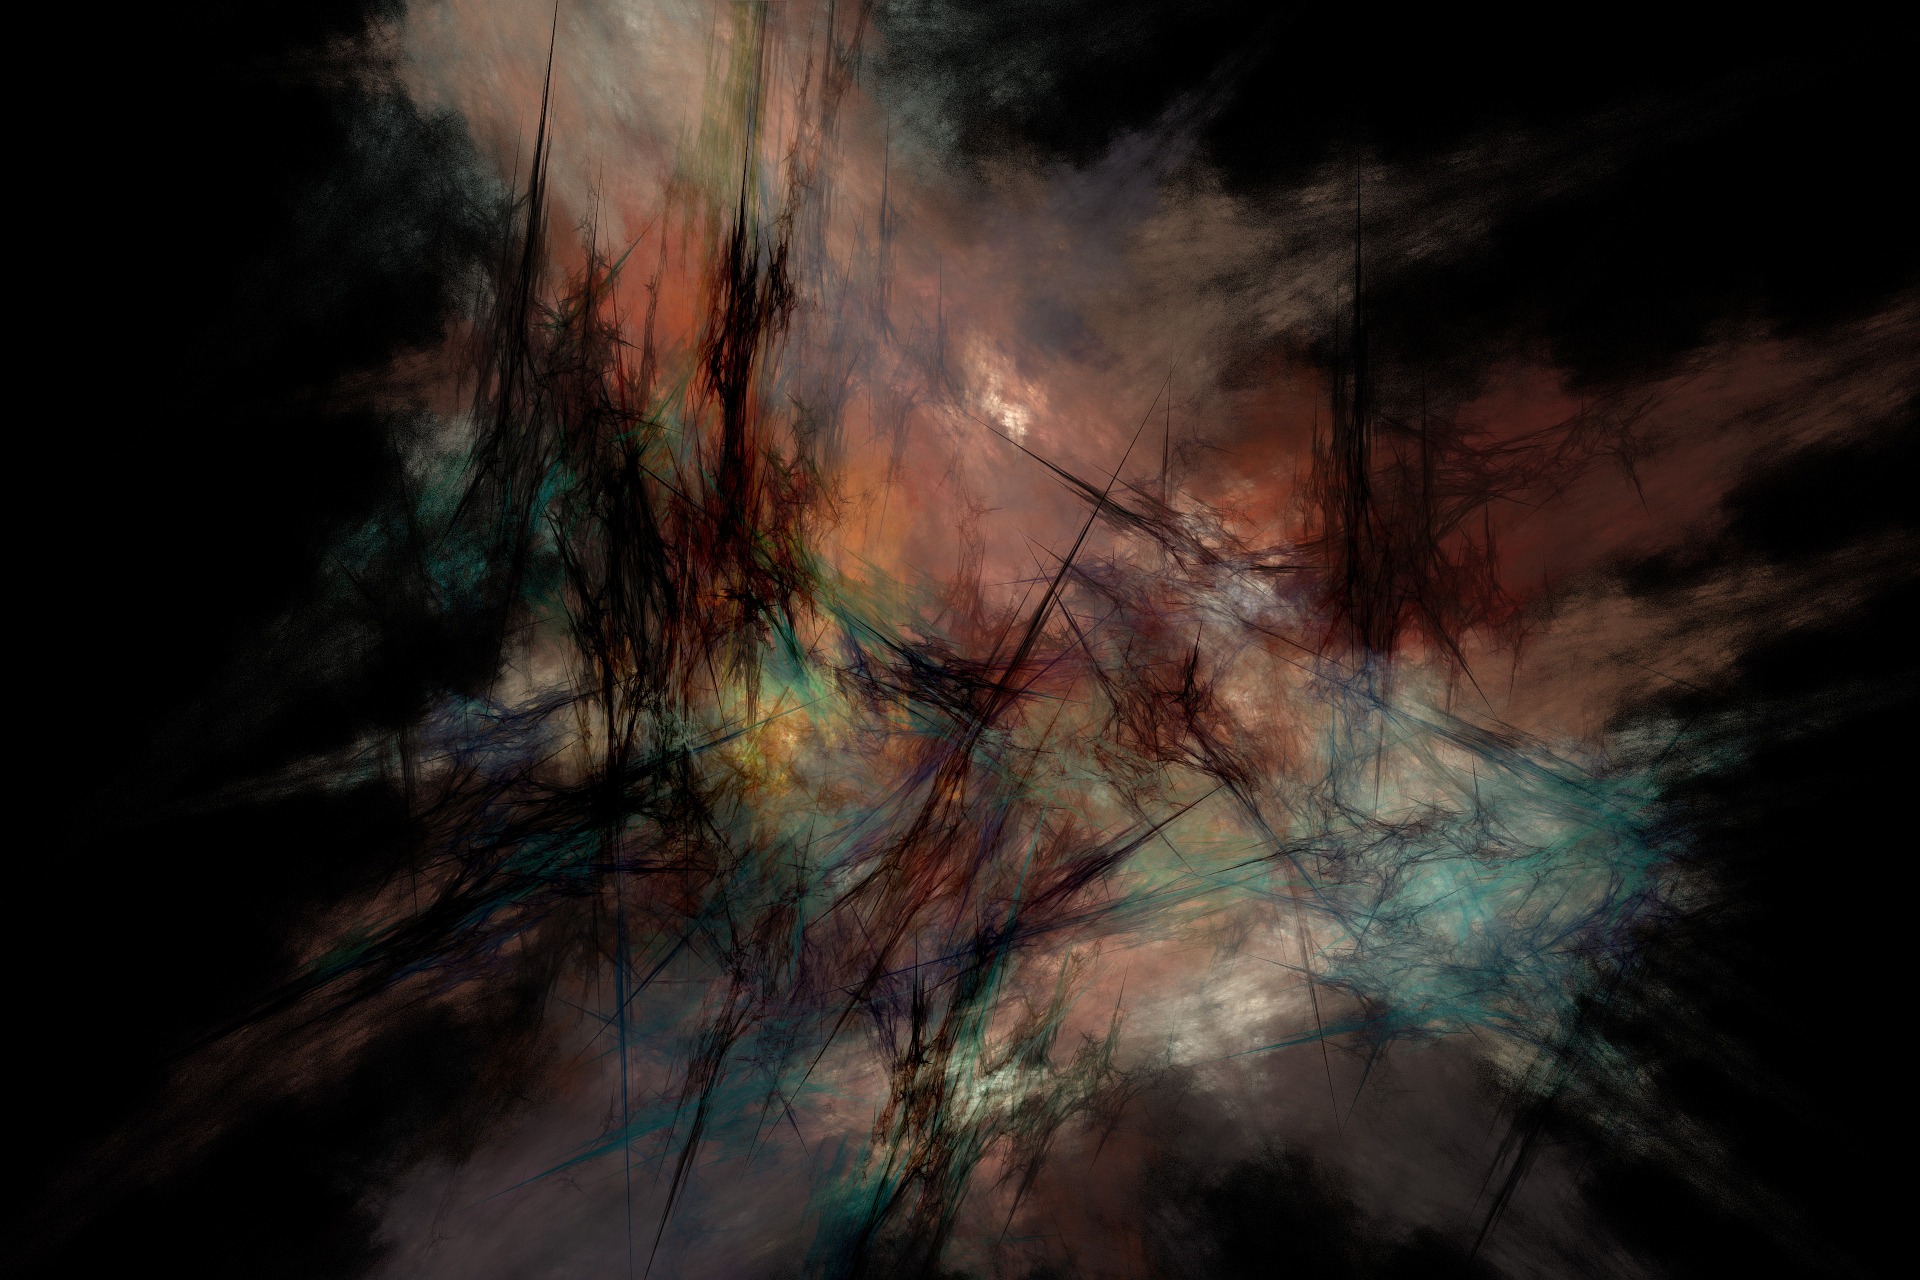 Abstract image